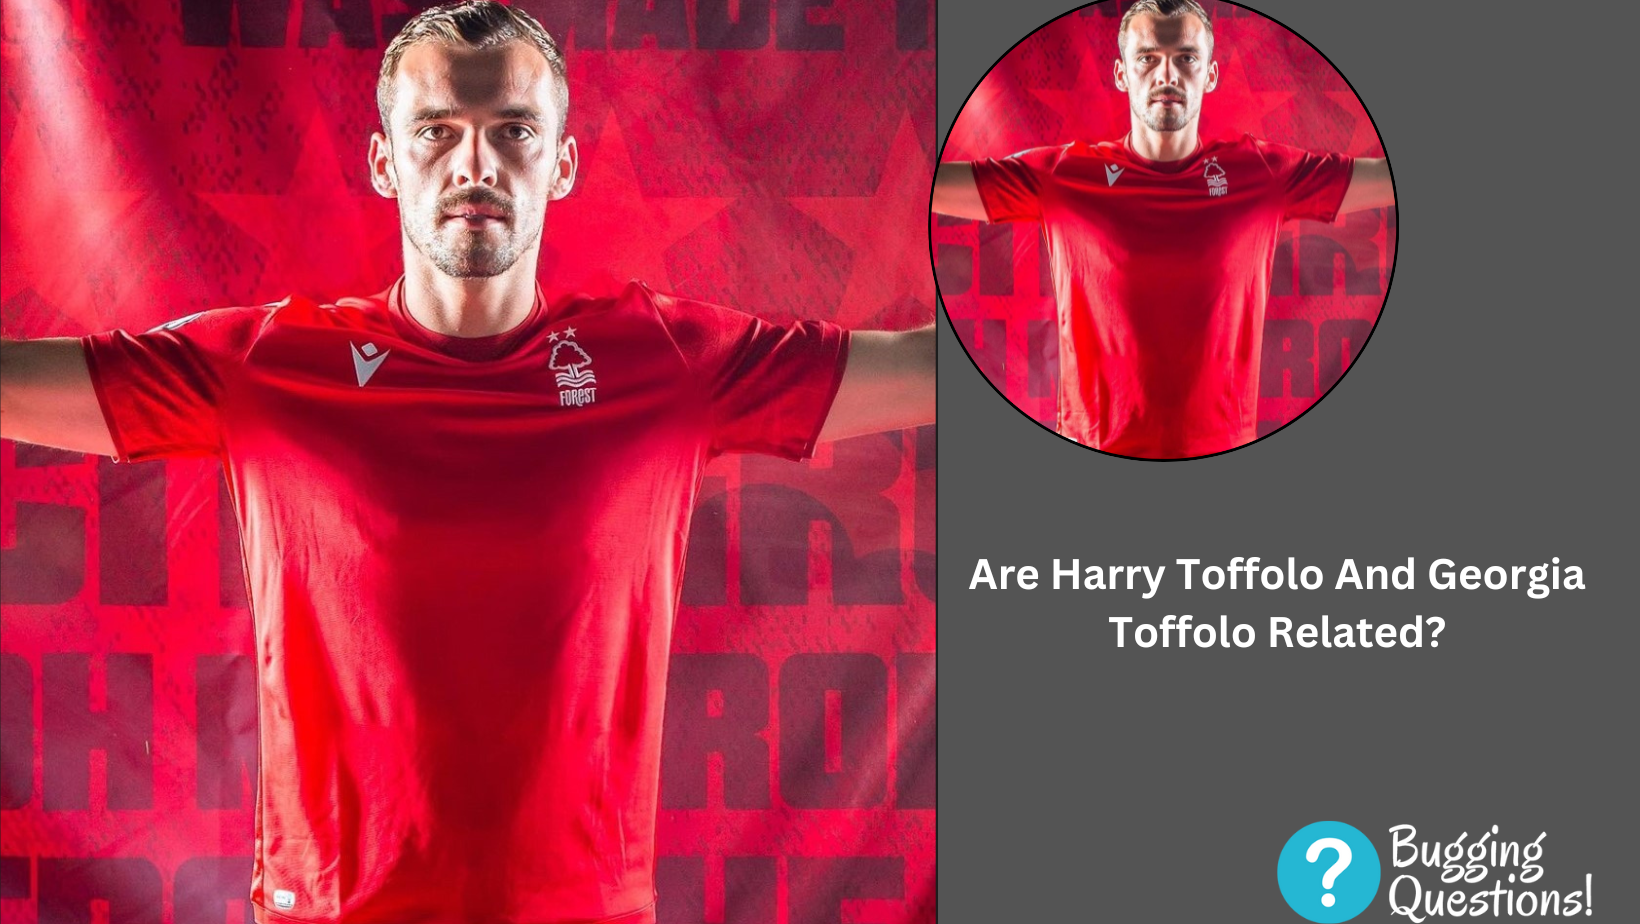 Are Harry Toffolo And Georgia Toffolo Related?